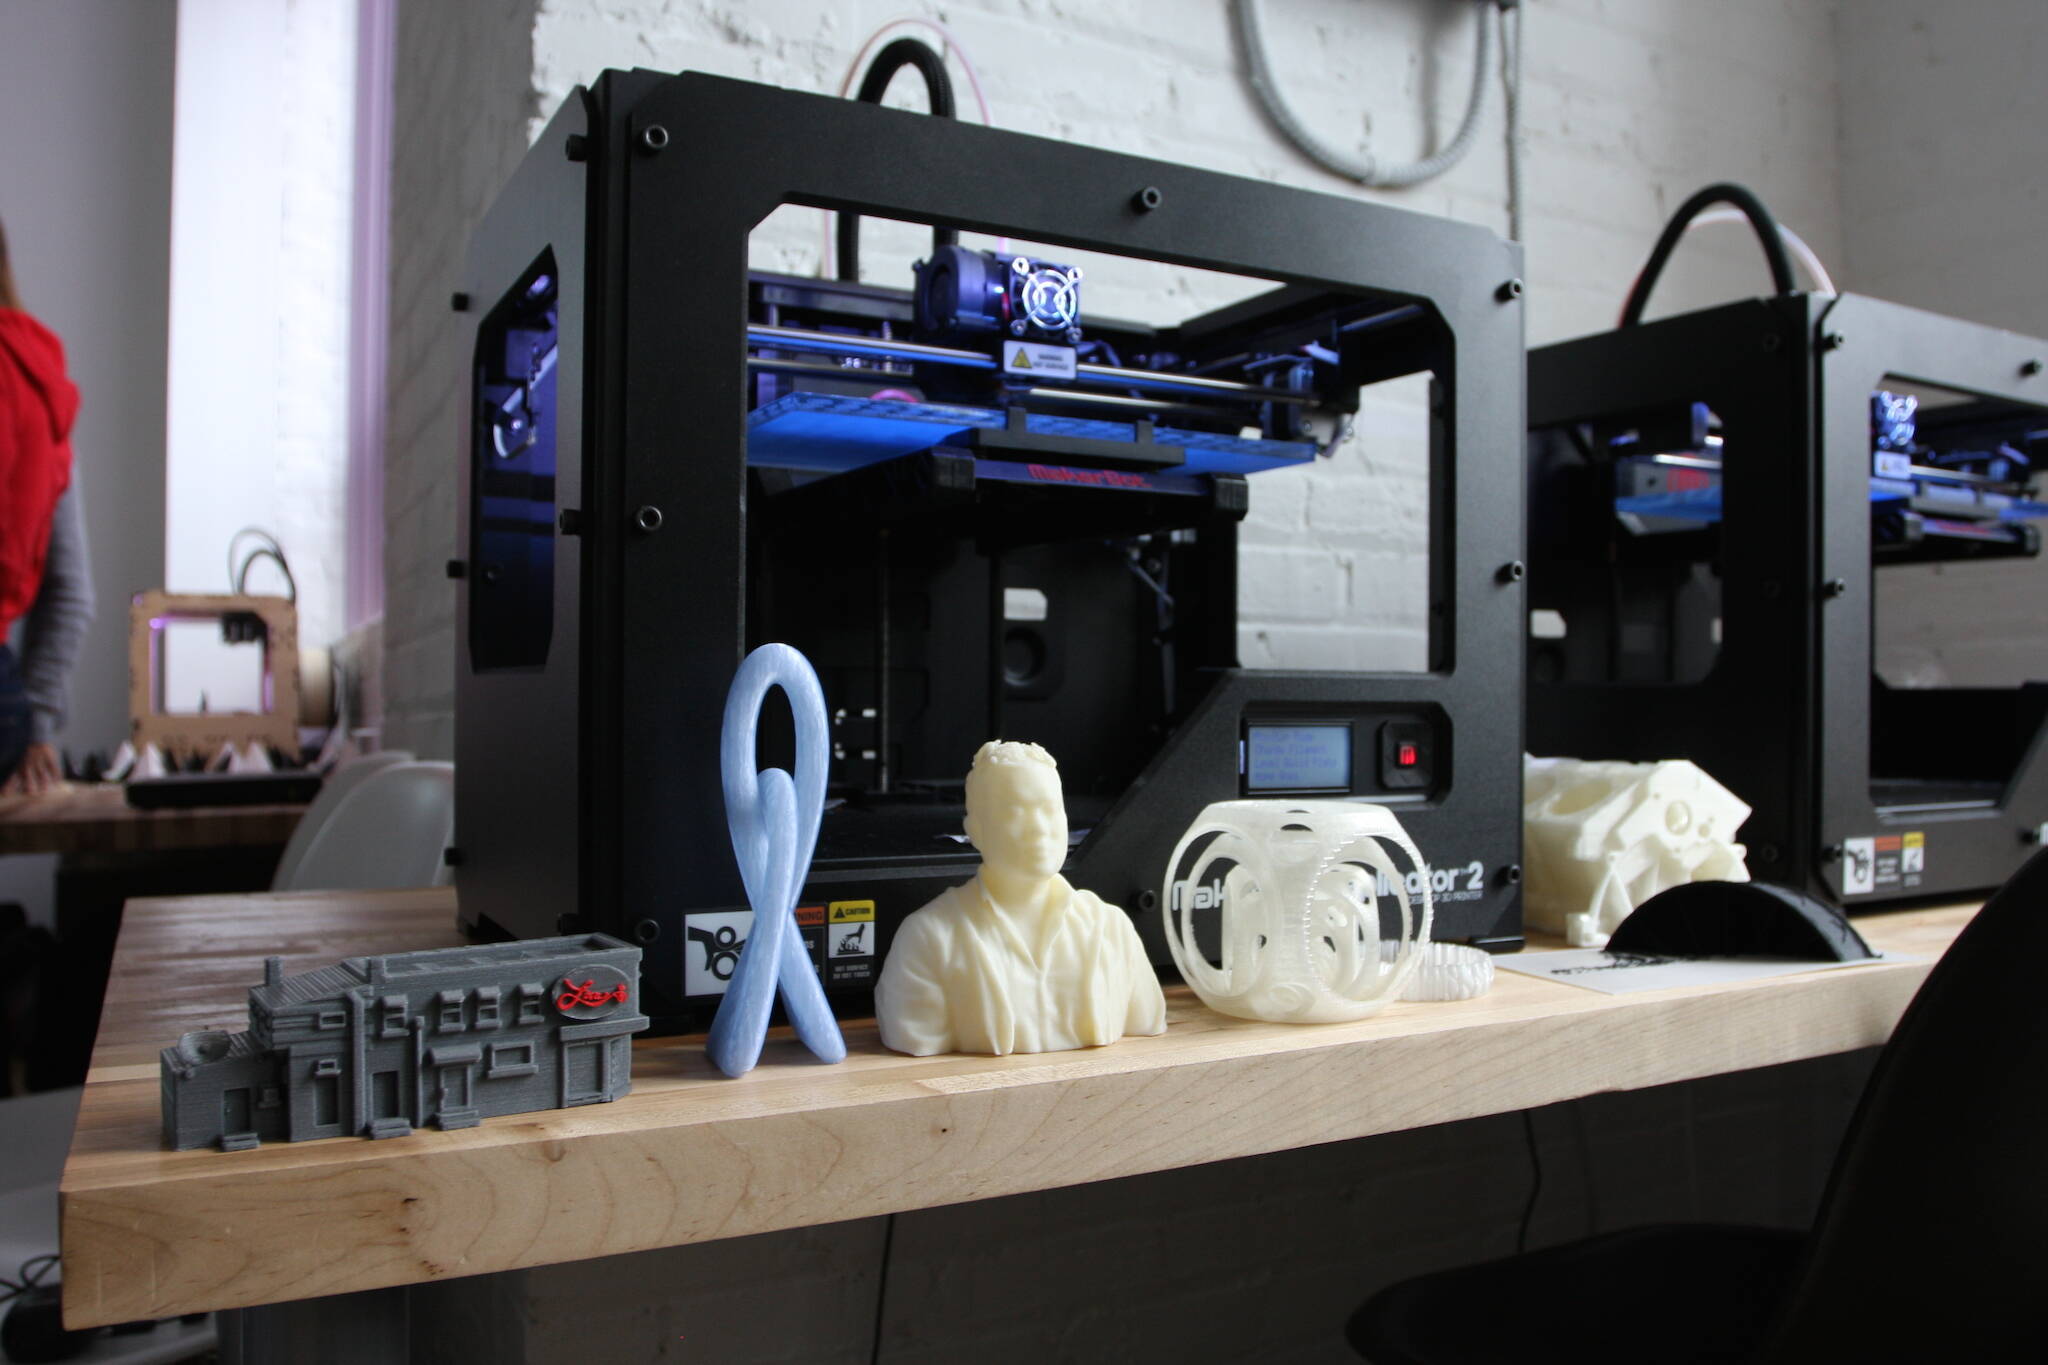 The top 3D printers and printing services in Toronto - 2017412 Hotopfactory